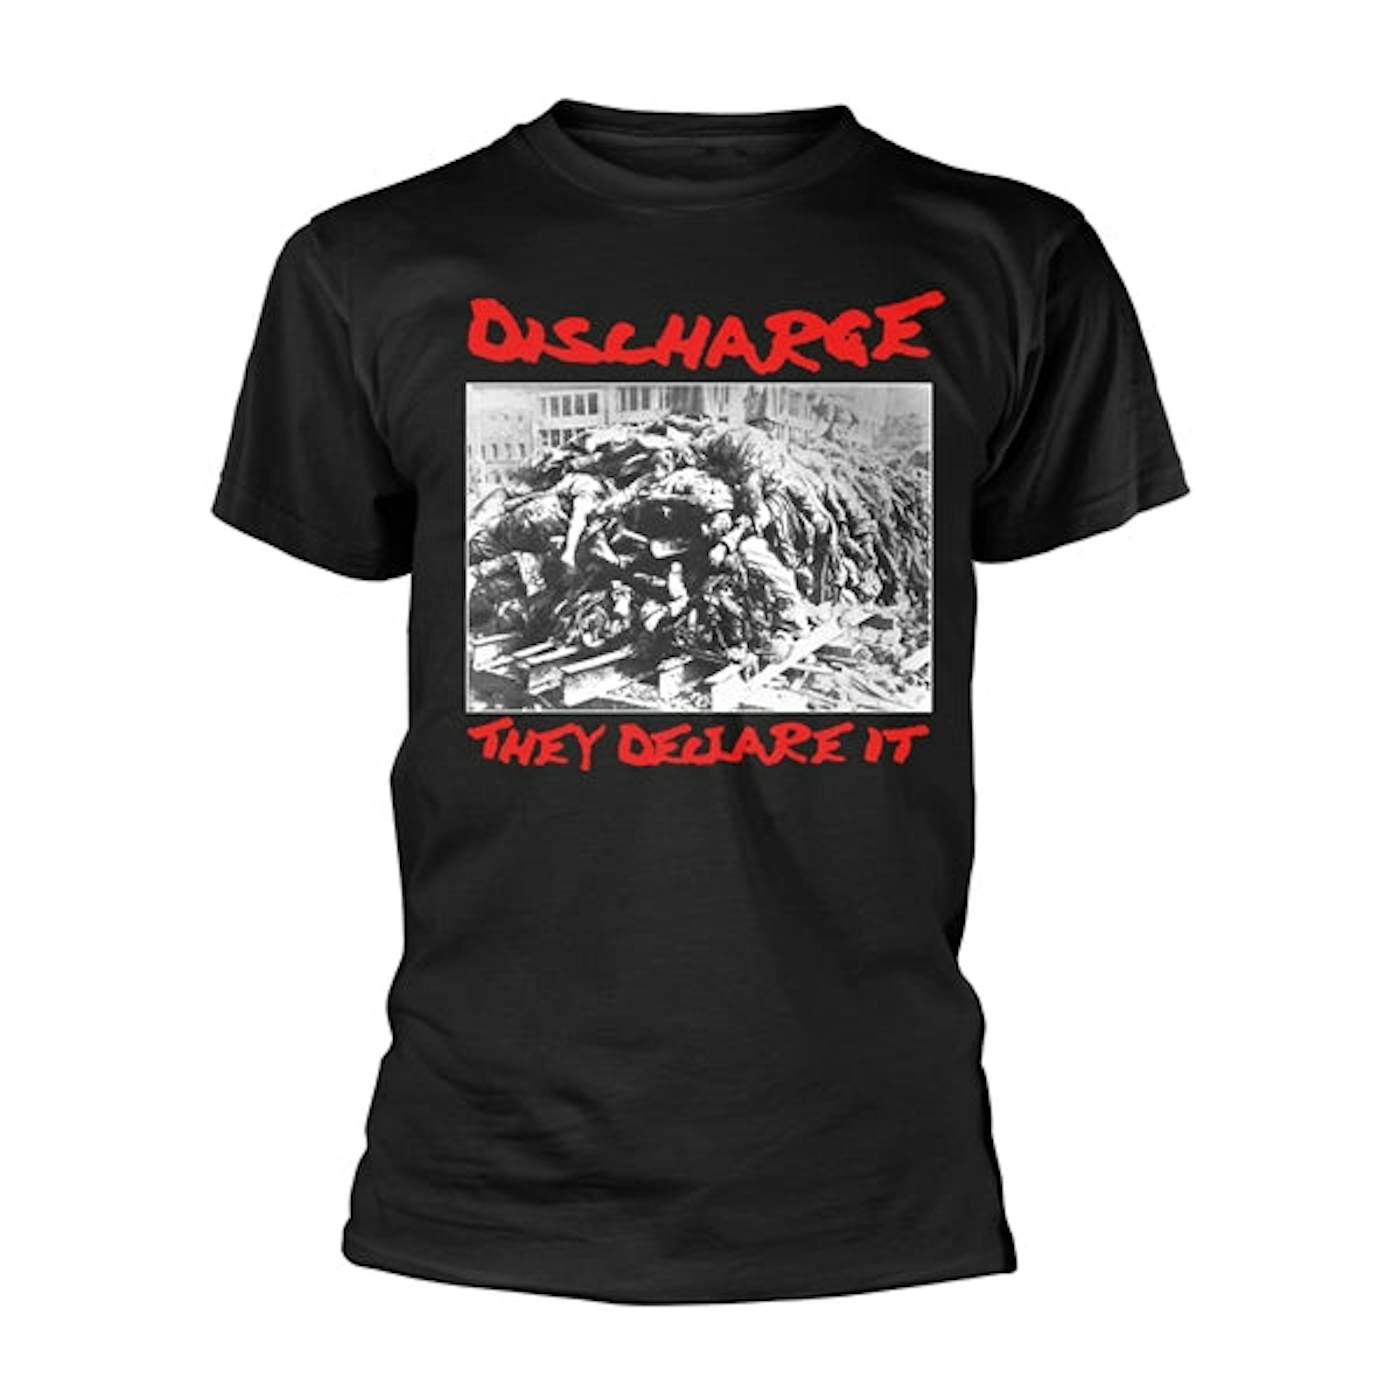 Discharge T Shirt - They Declare It